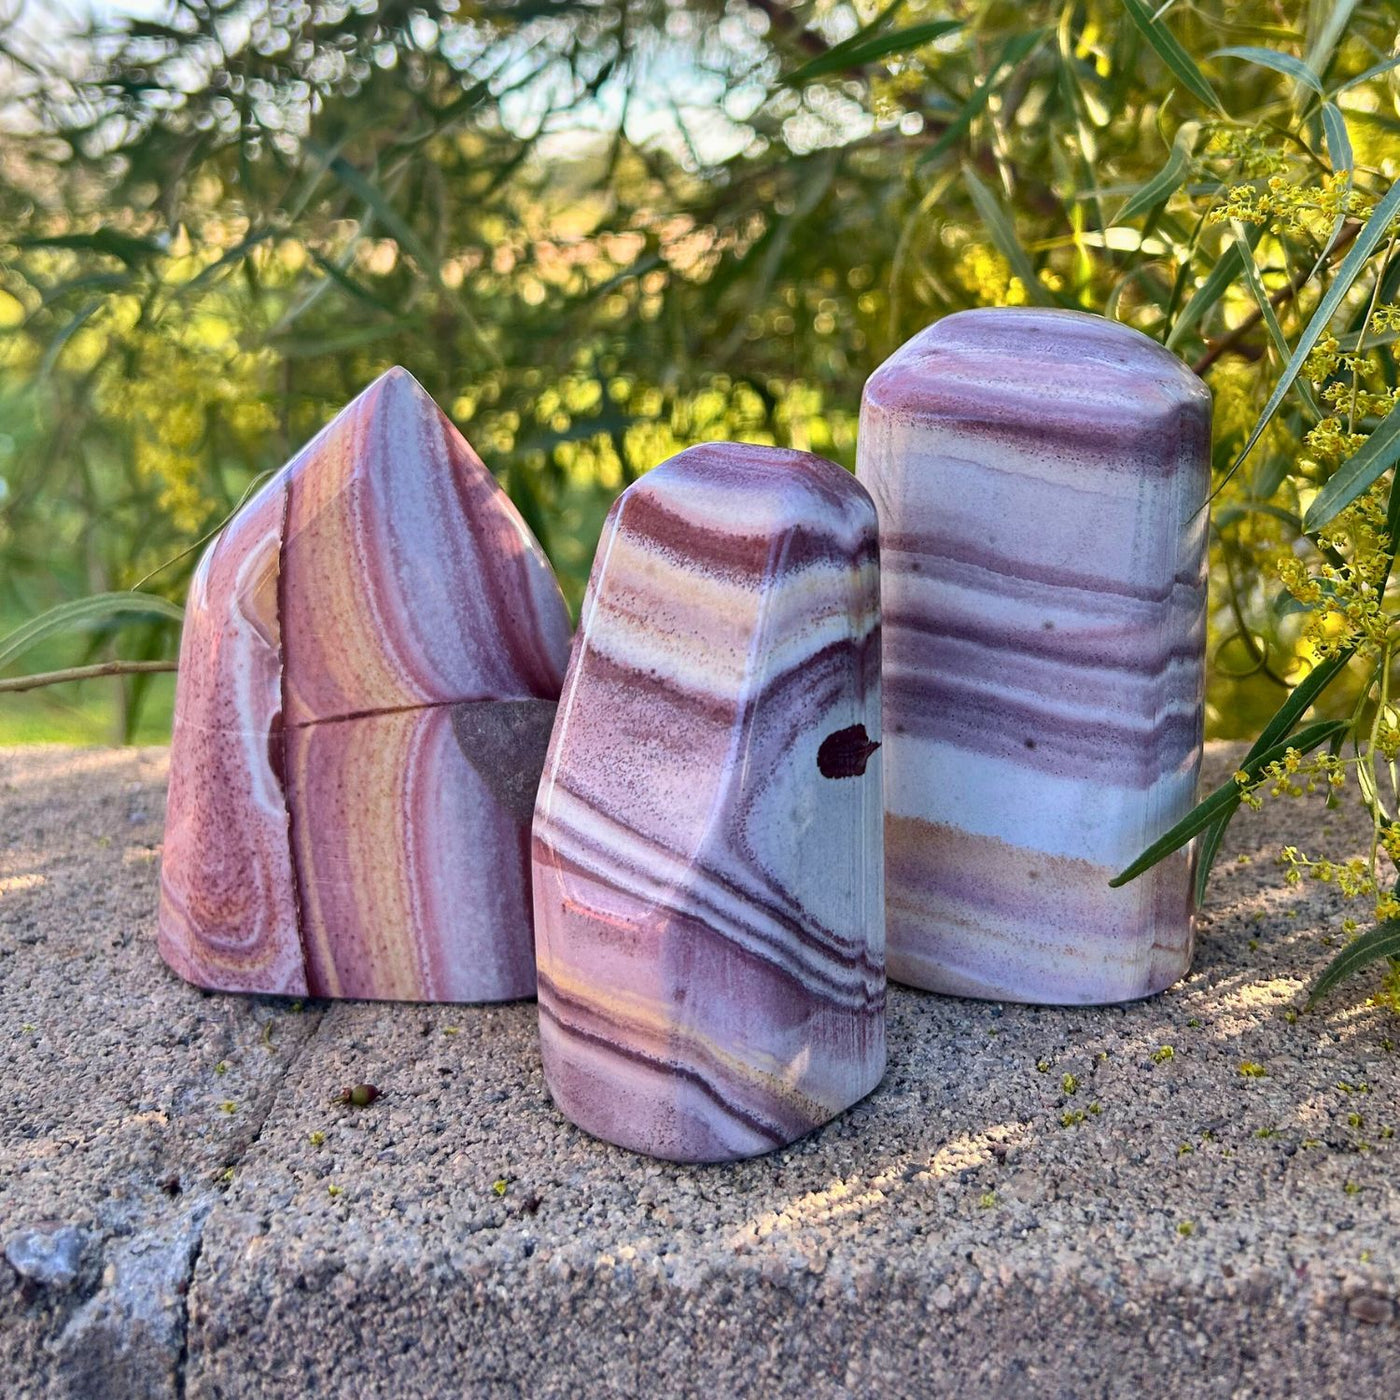 Collection of 3 Rainbow Rhyolite freeform crystals by Energy Muse to display the variance in shape, size, pattern and color.